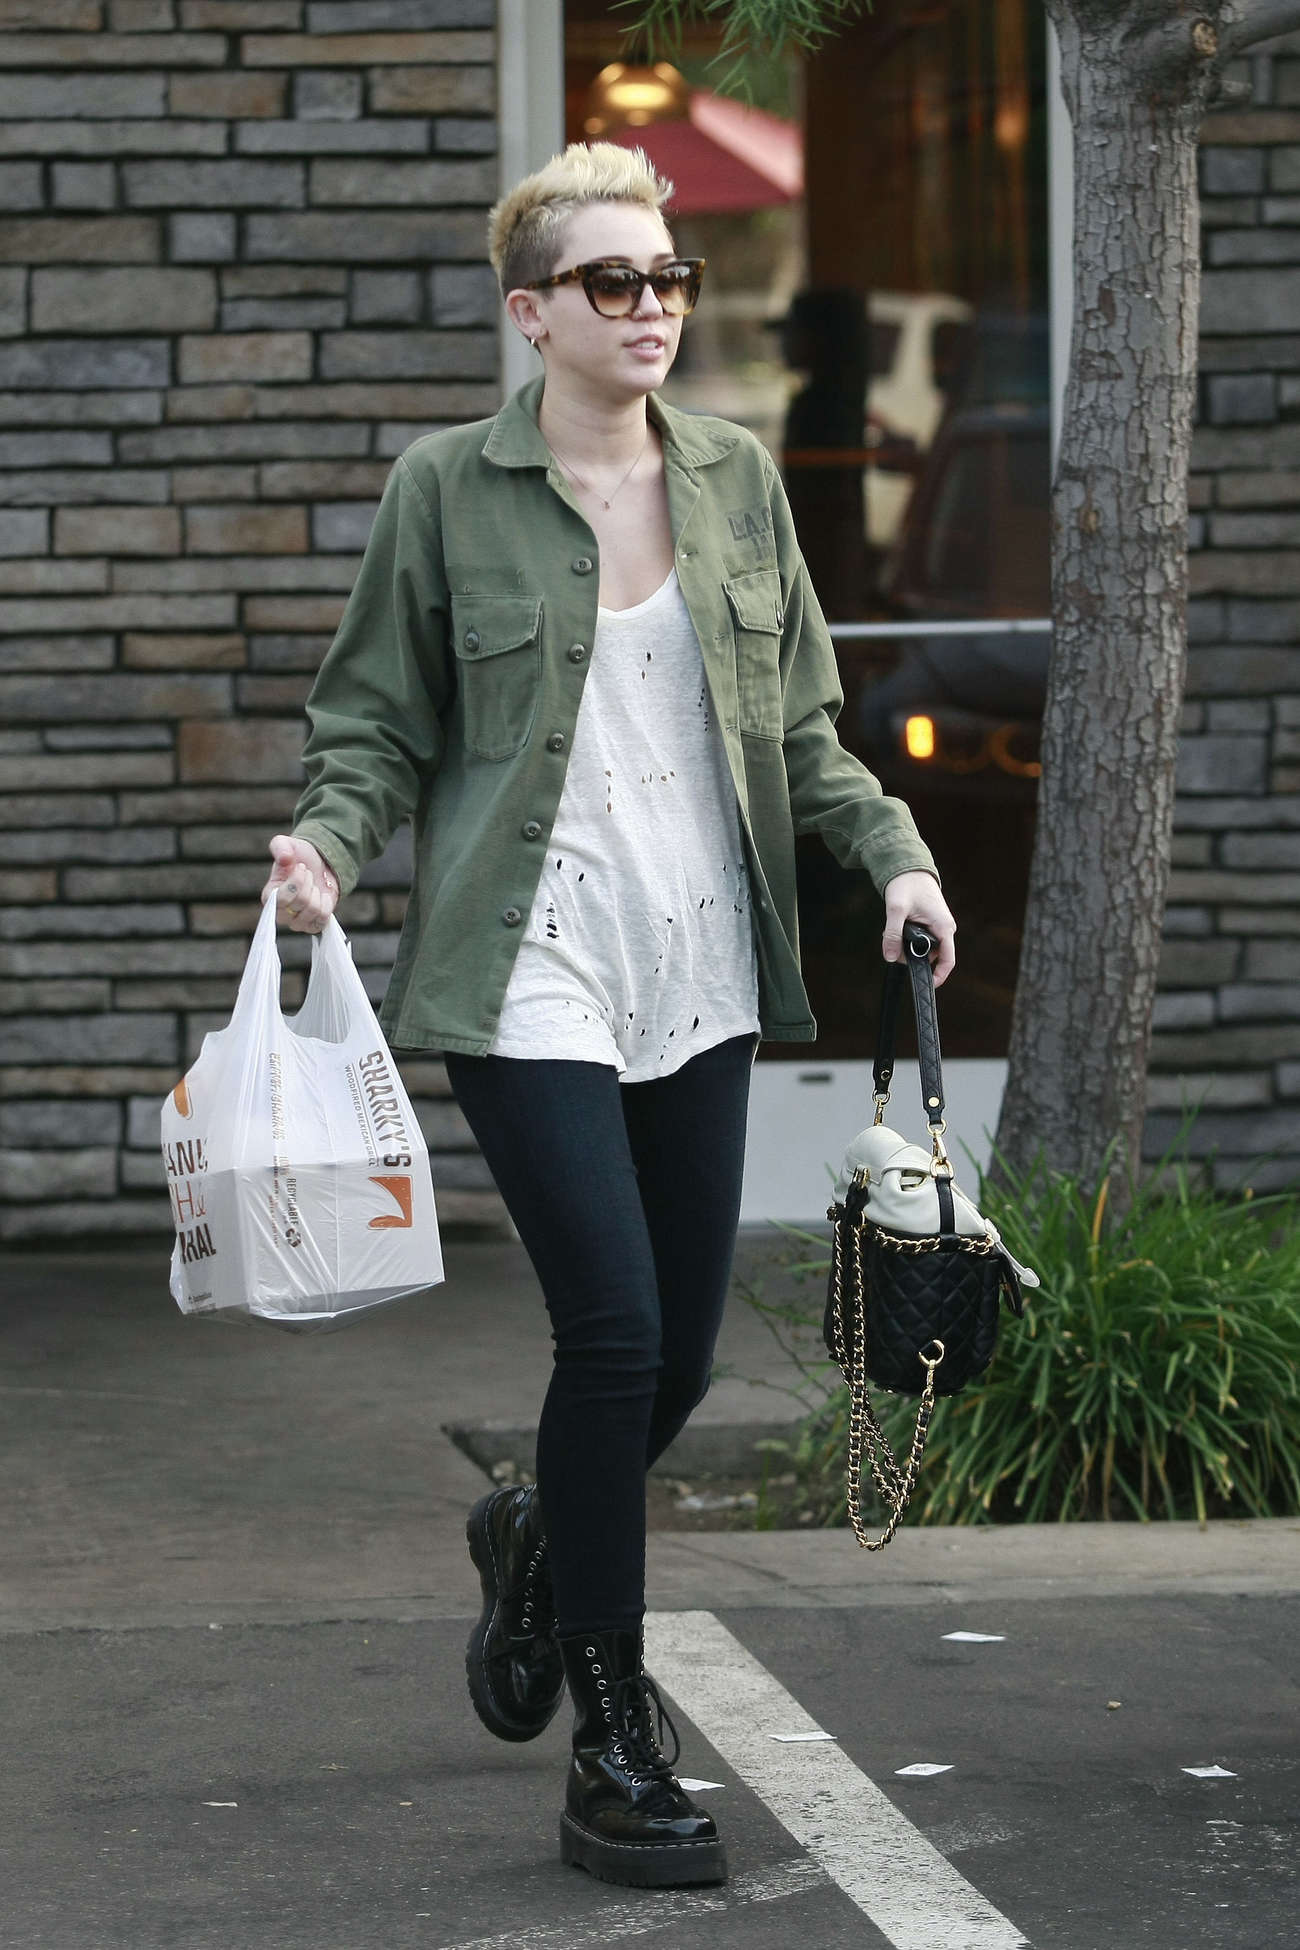 Miley Cyrus - Candids at Sharky’s Woodfired Mexican Grill in Los Angeles